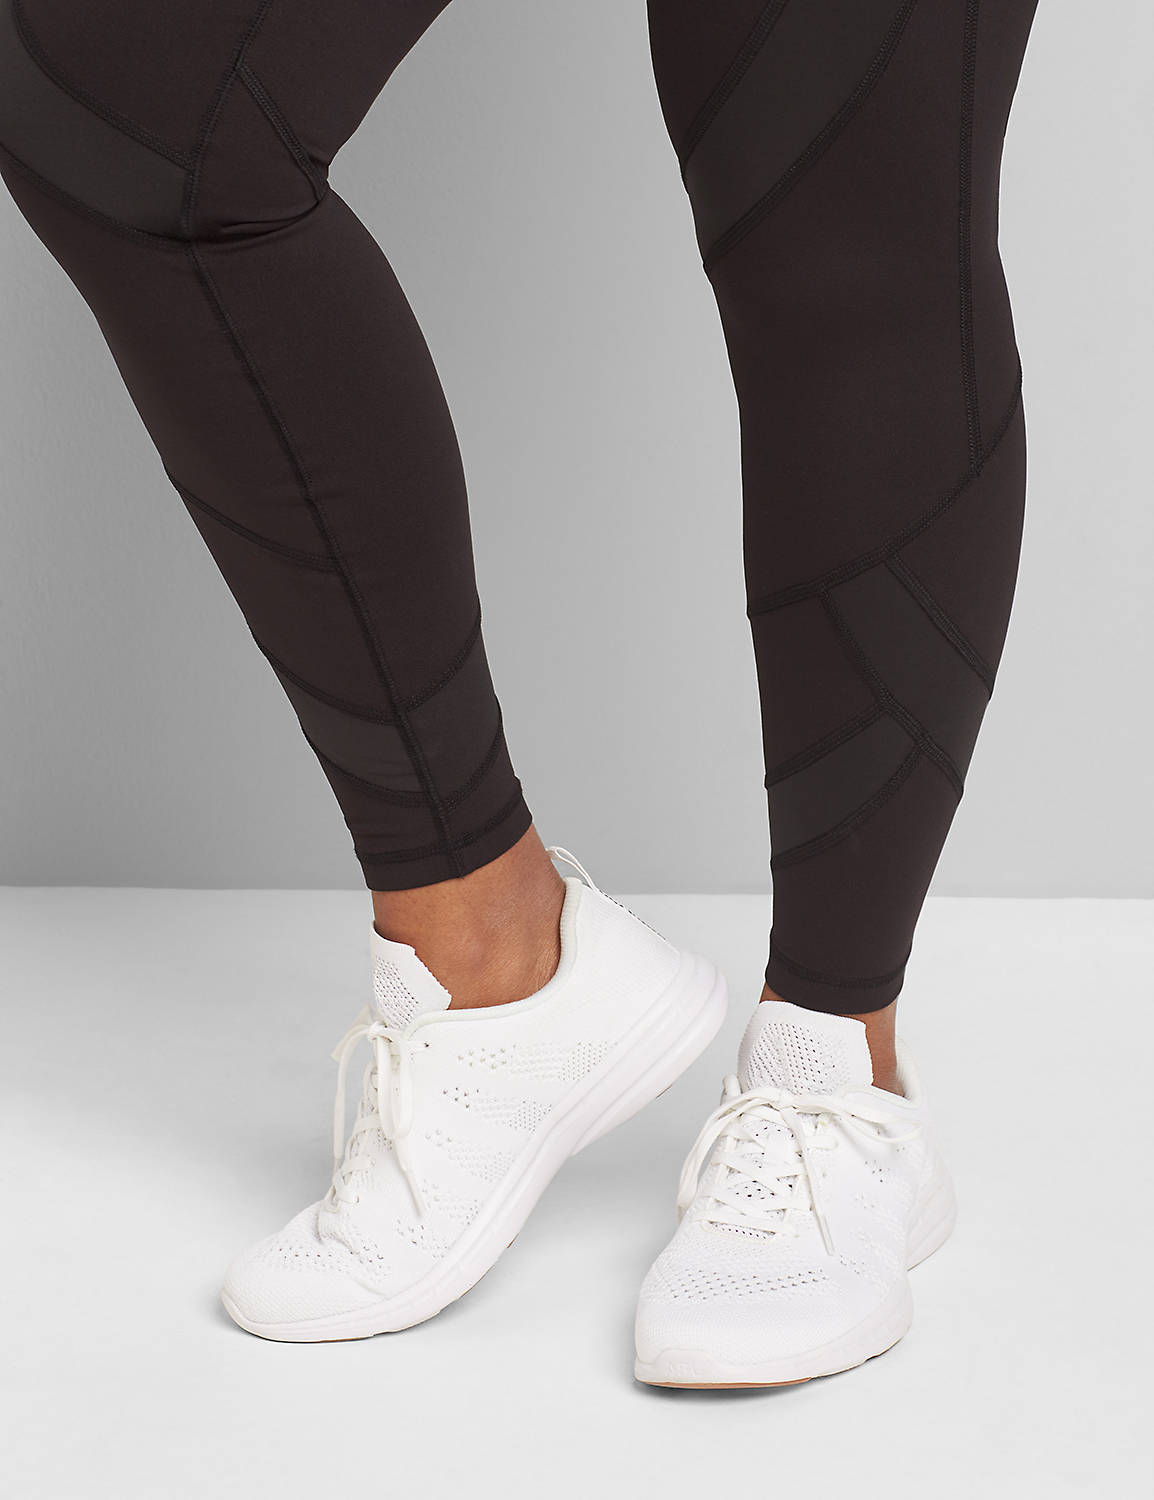 LIVI 7/8 Power Legging With Wicking - Shine Spliced Product Image 4